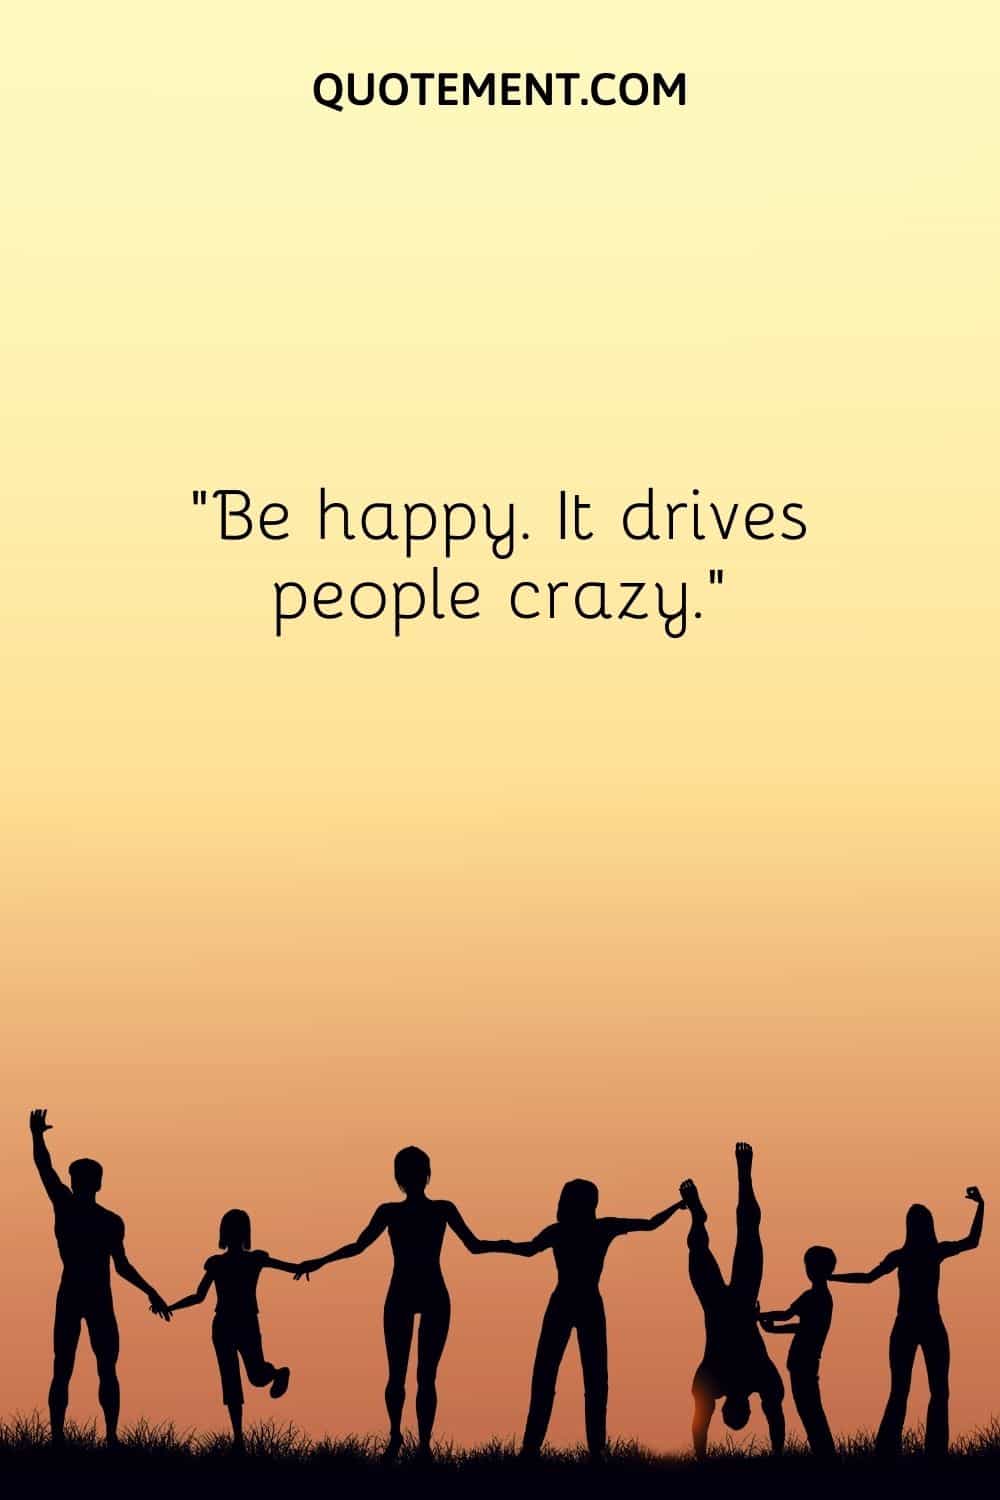 Be happy. It drives people crazy